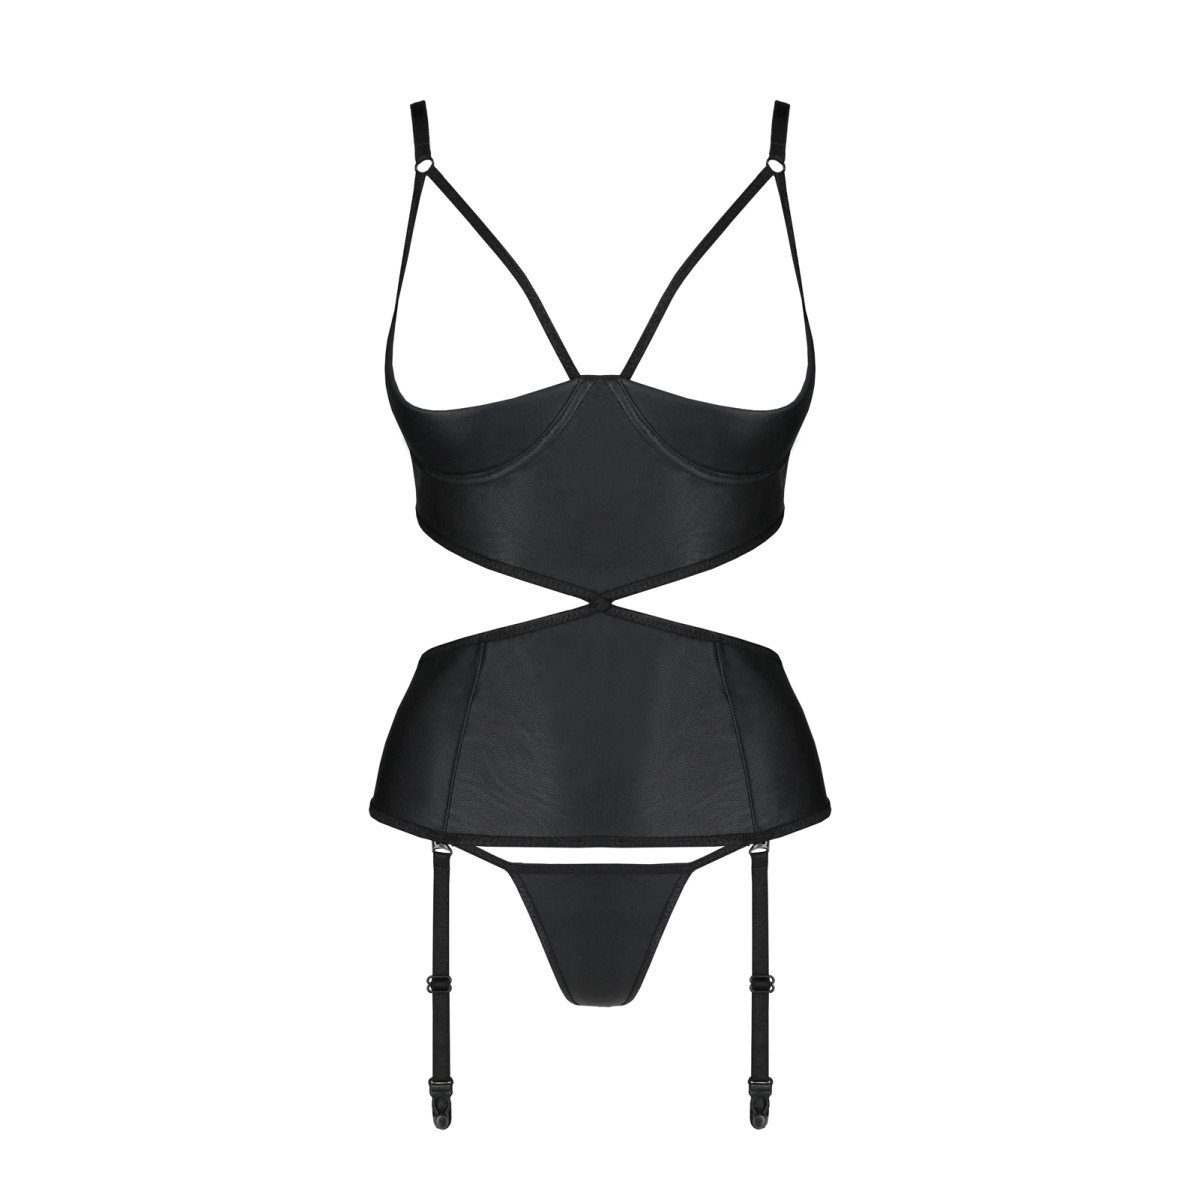 with - (L/XL,S/M,XXL) PE open black Jannies Corsage & Passion-Exklusiv thong cups corset